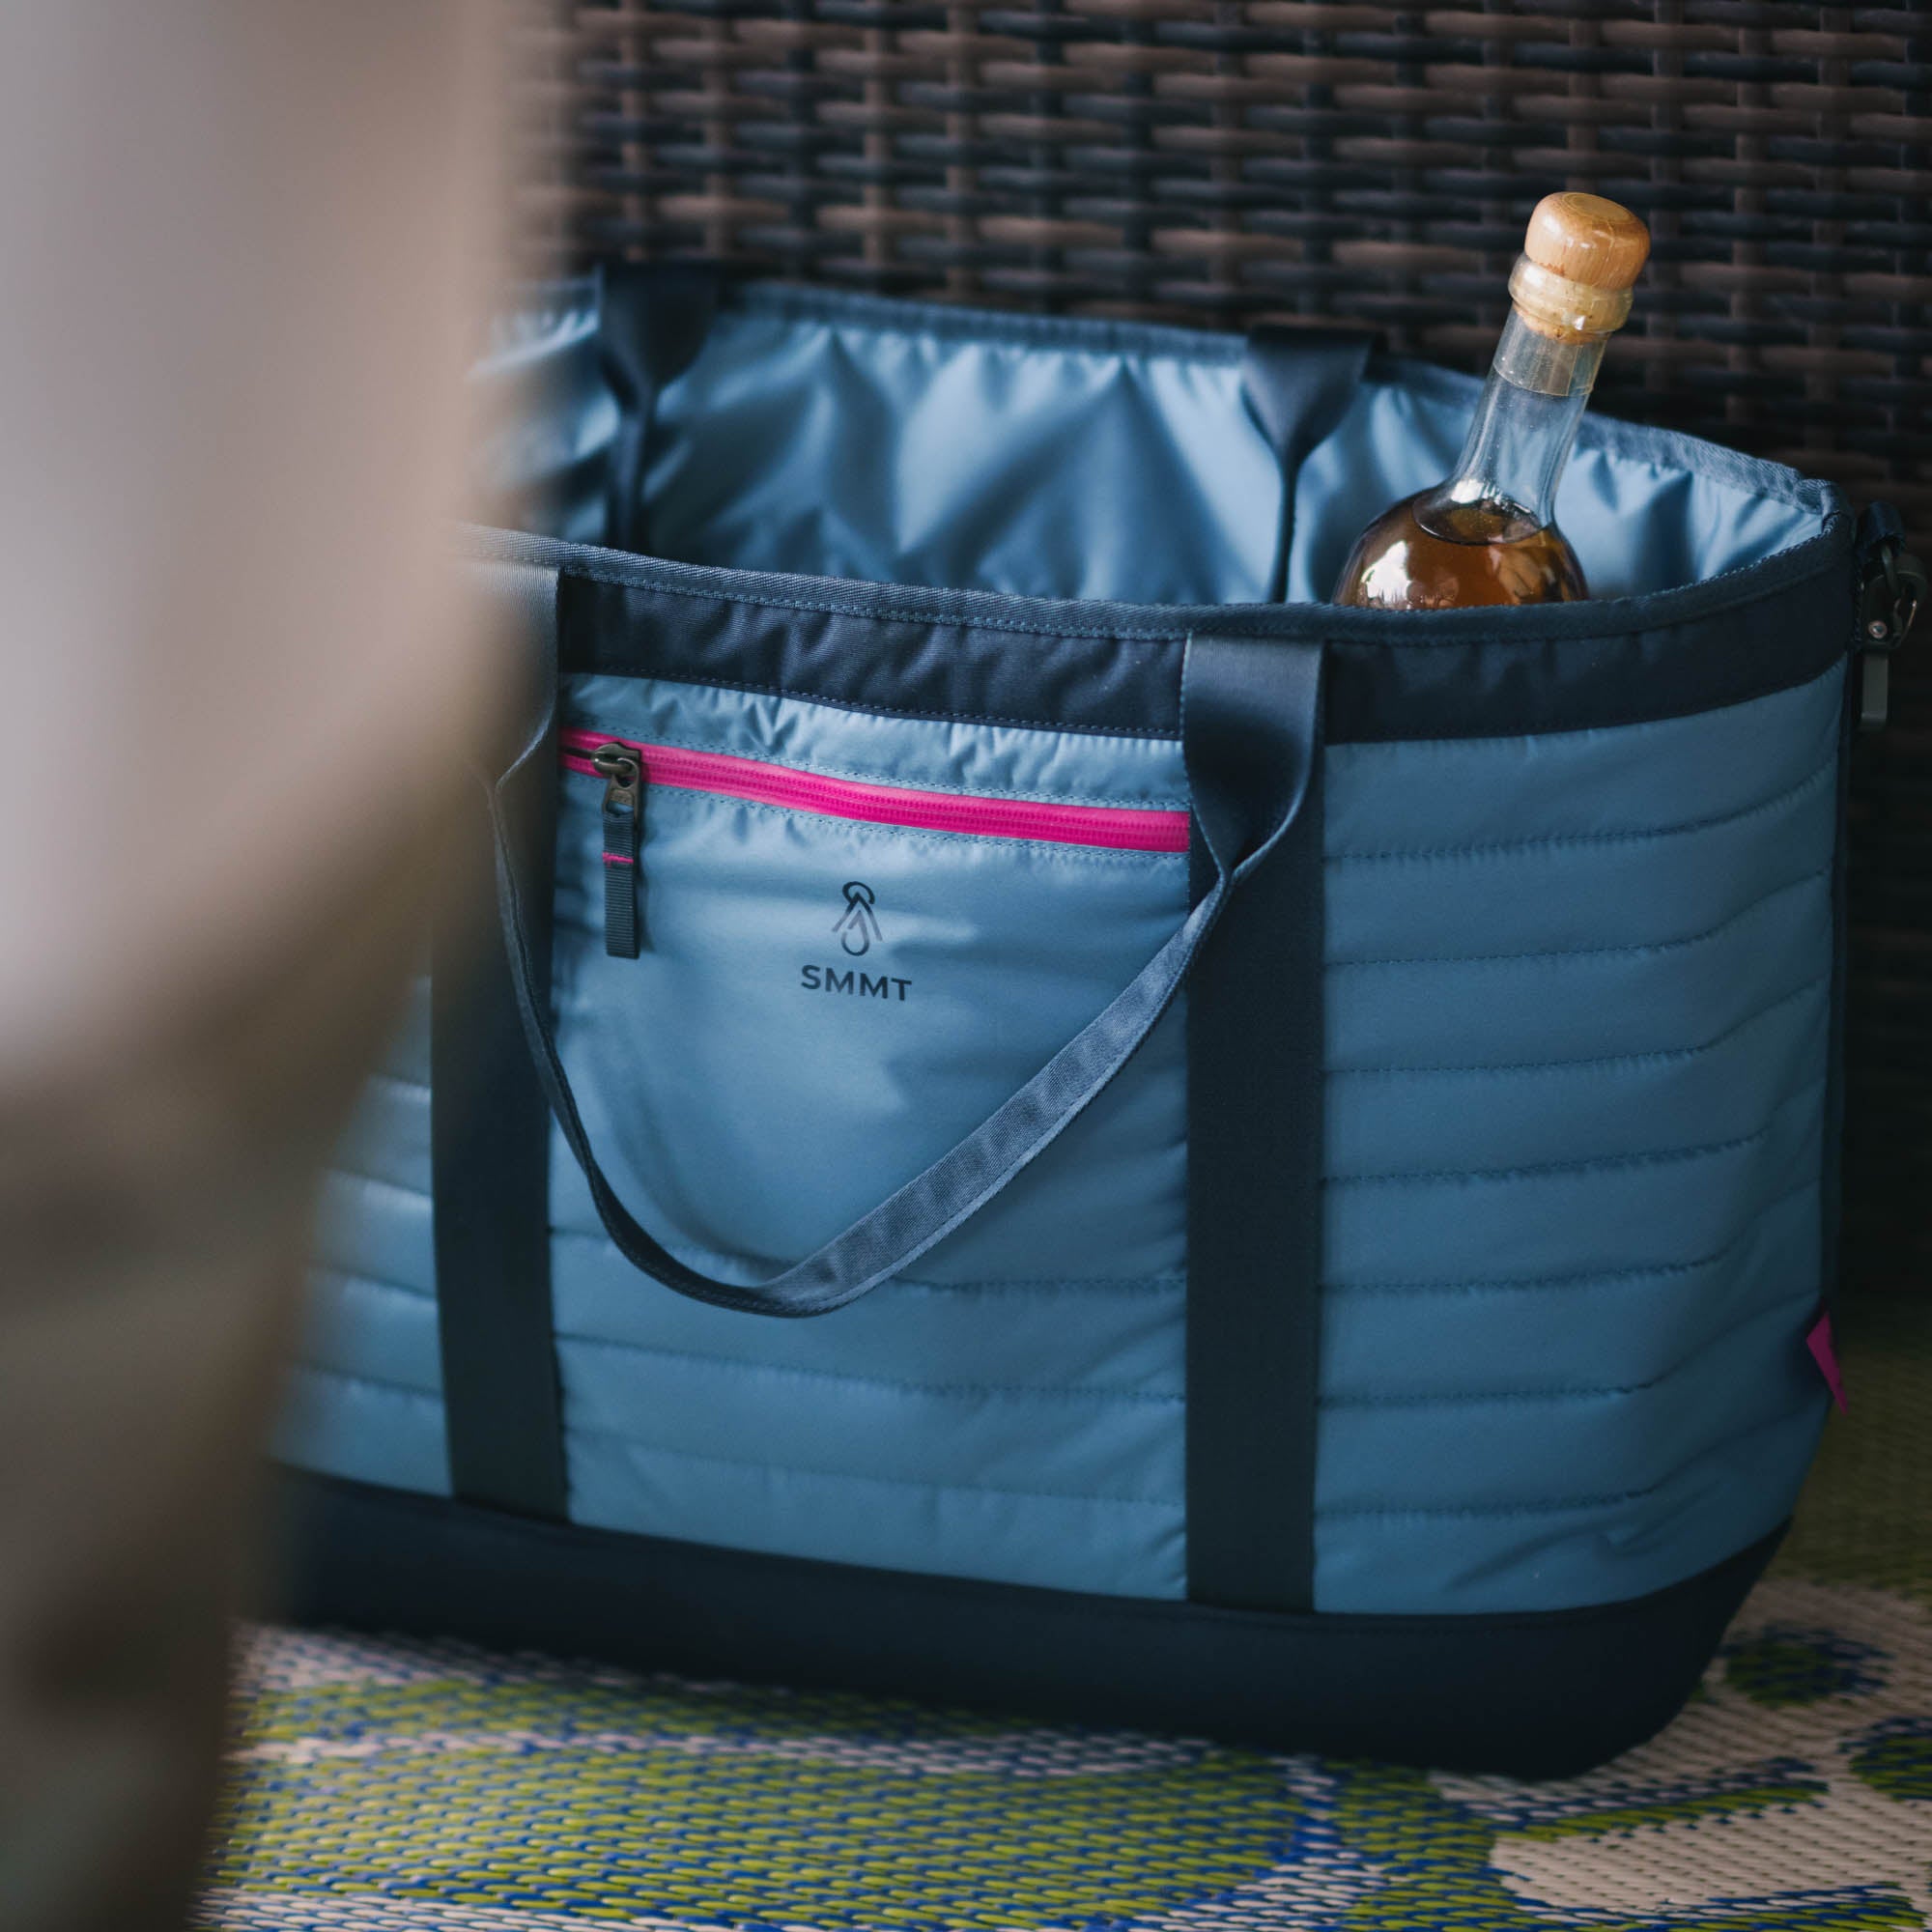 tote bag with bottle of wine inside